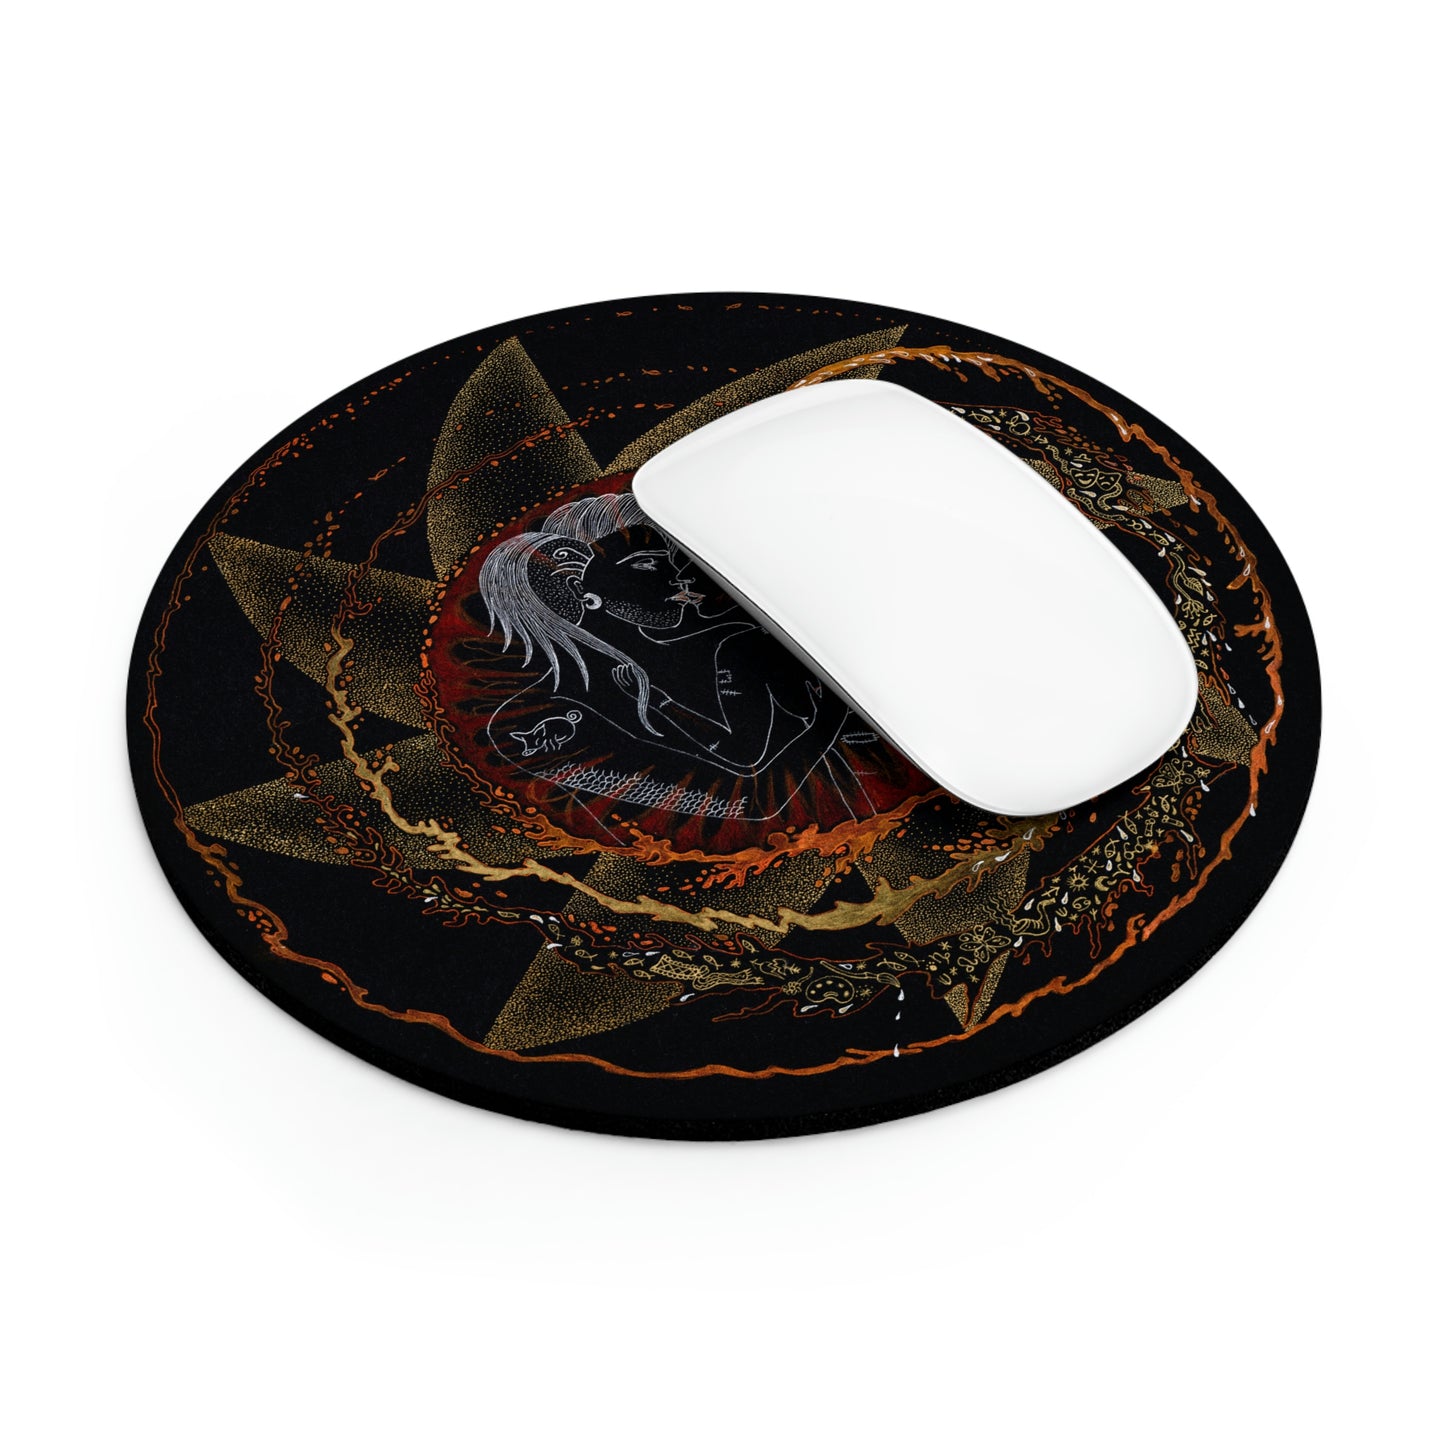 Chinese Zodiac Sign Mouse Pad (Pig)